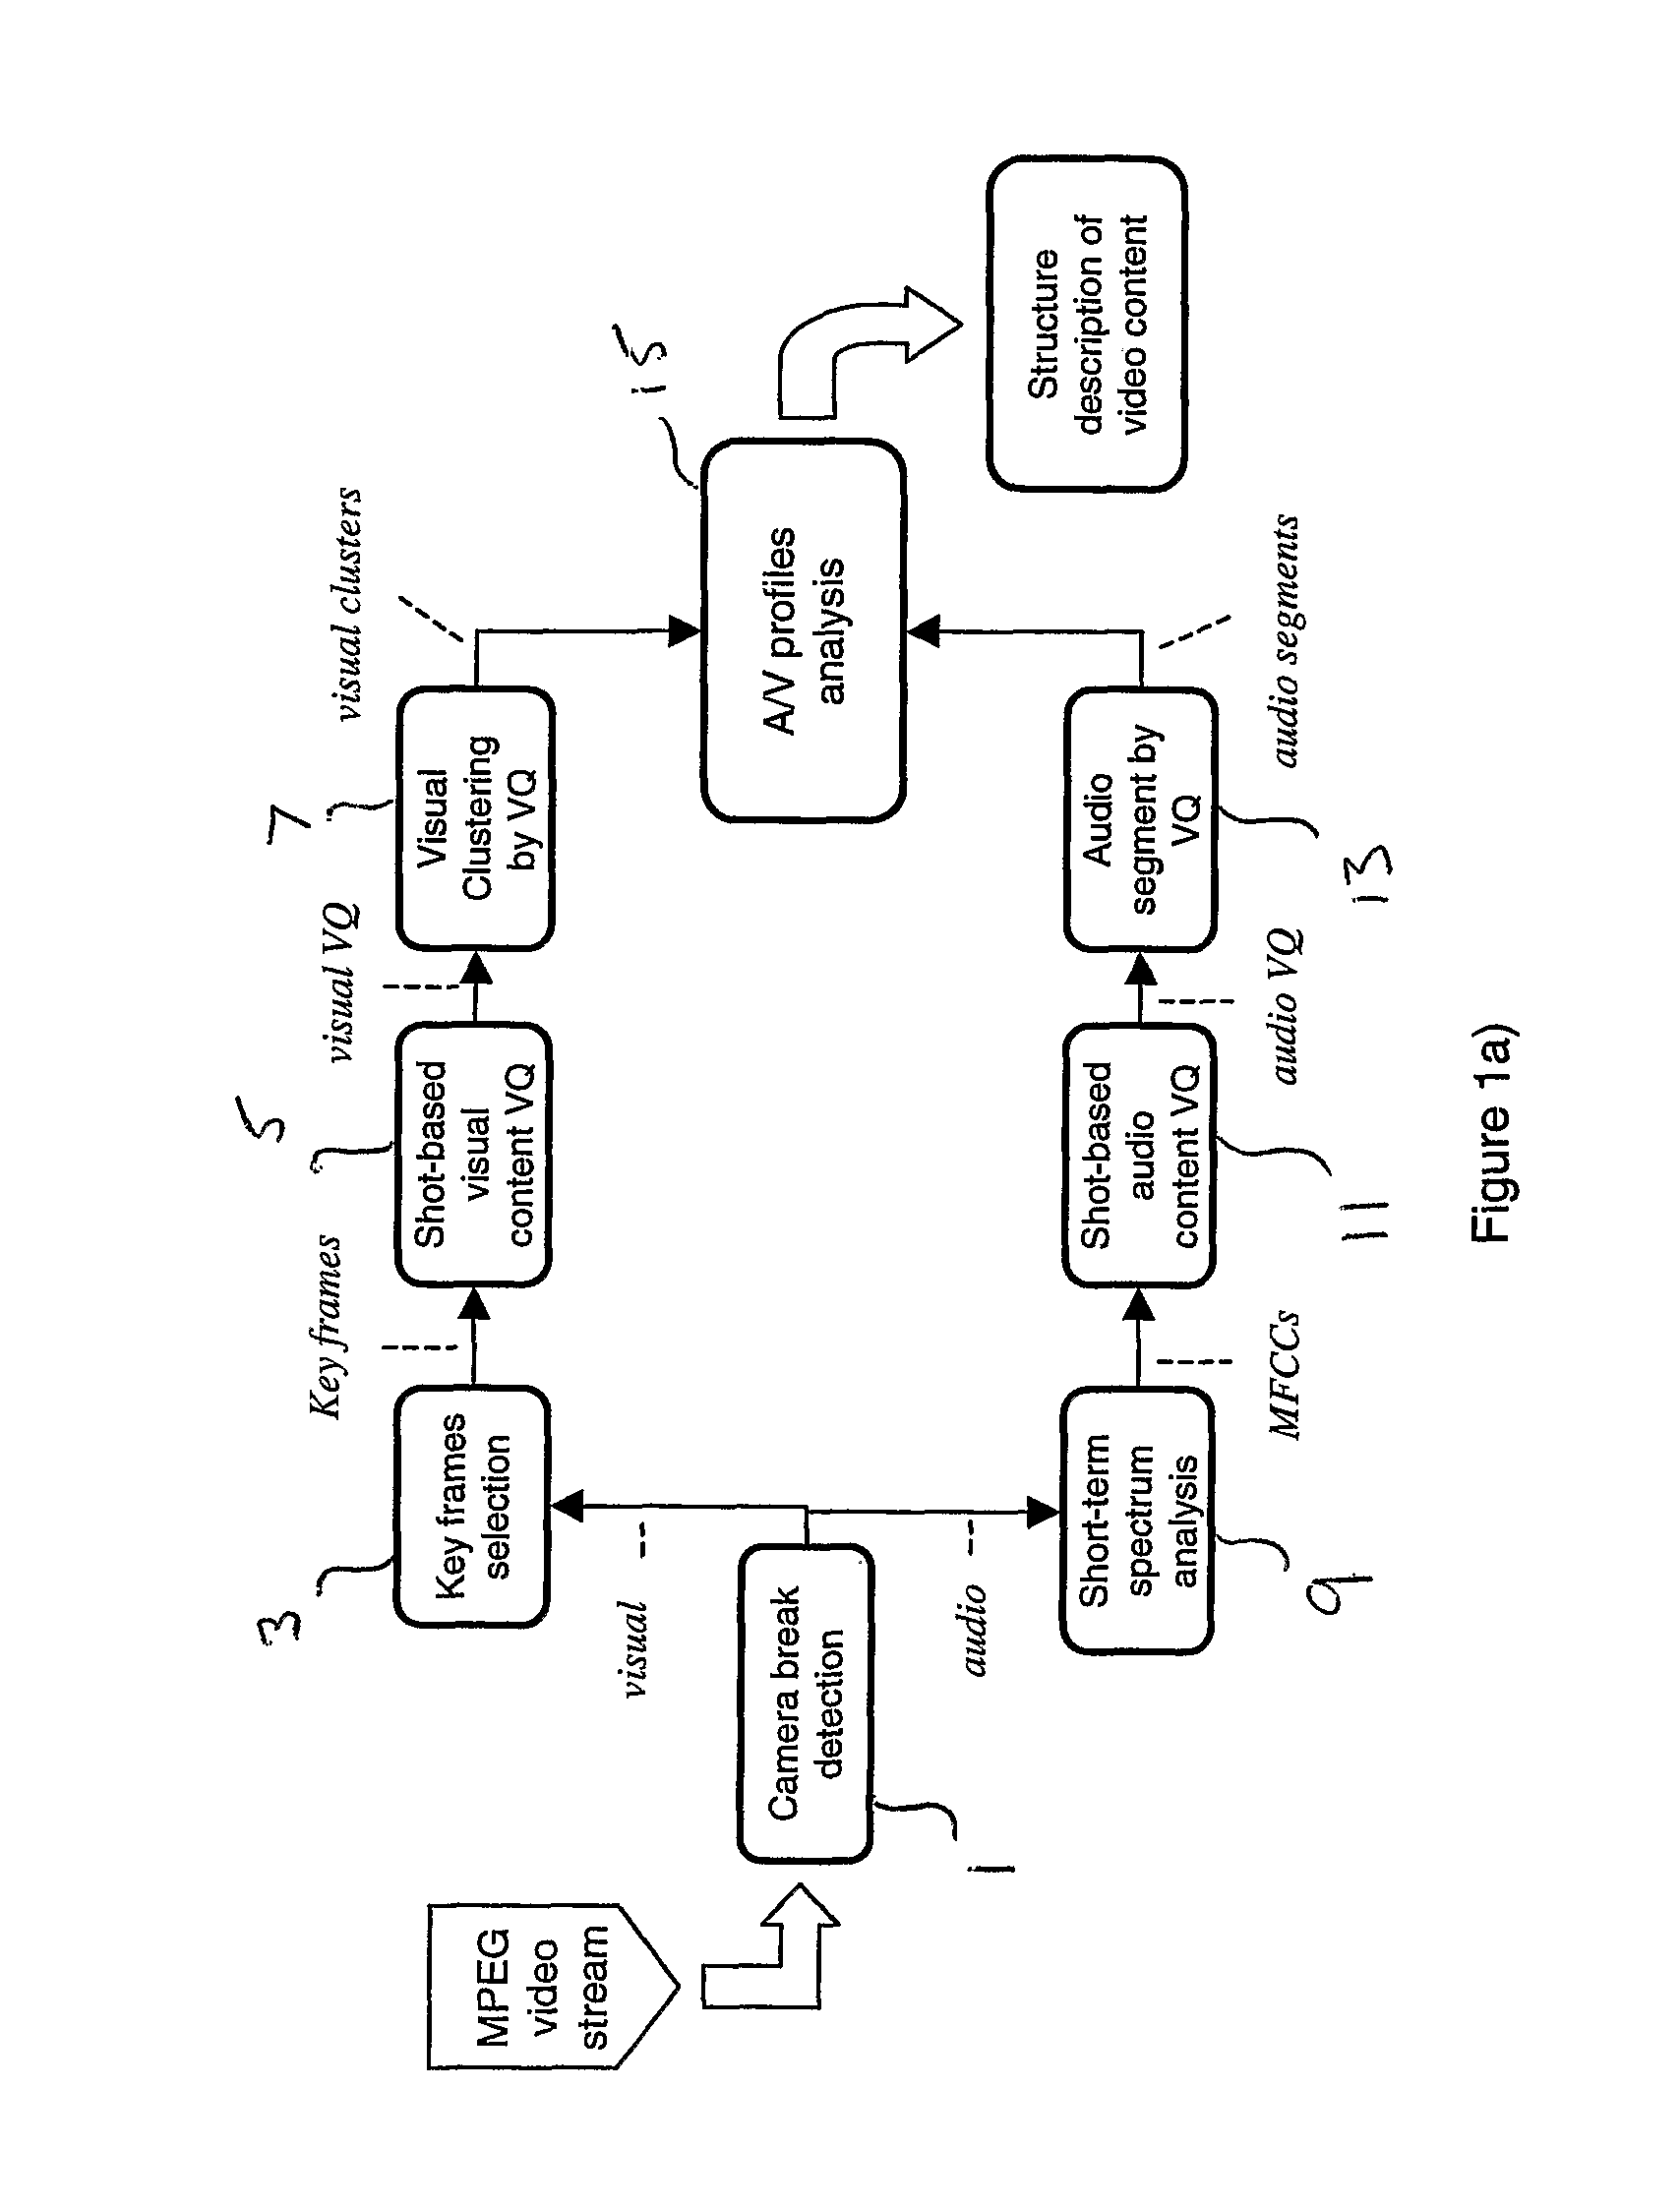 Method and system for semantically segmenting scenes of a video sequence